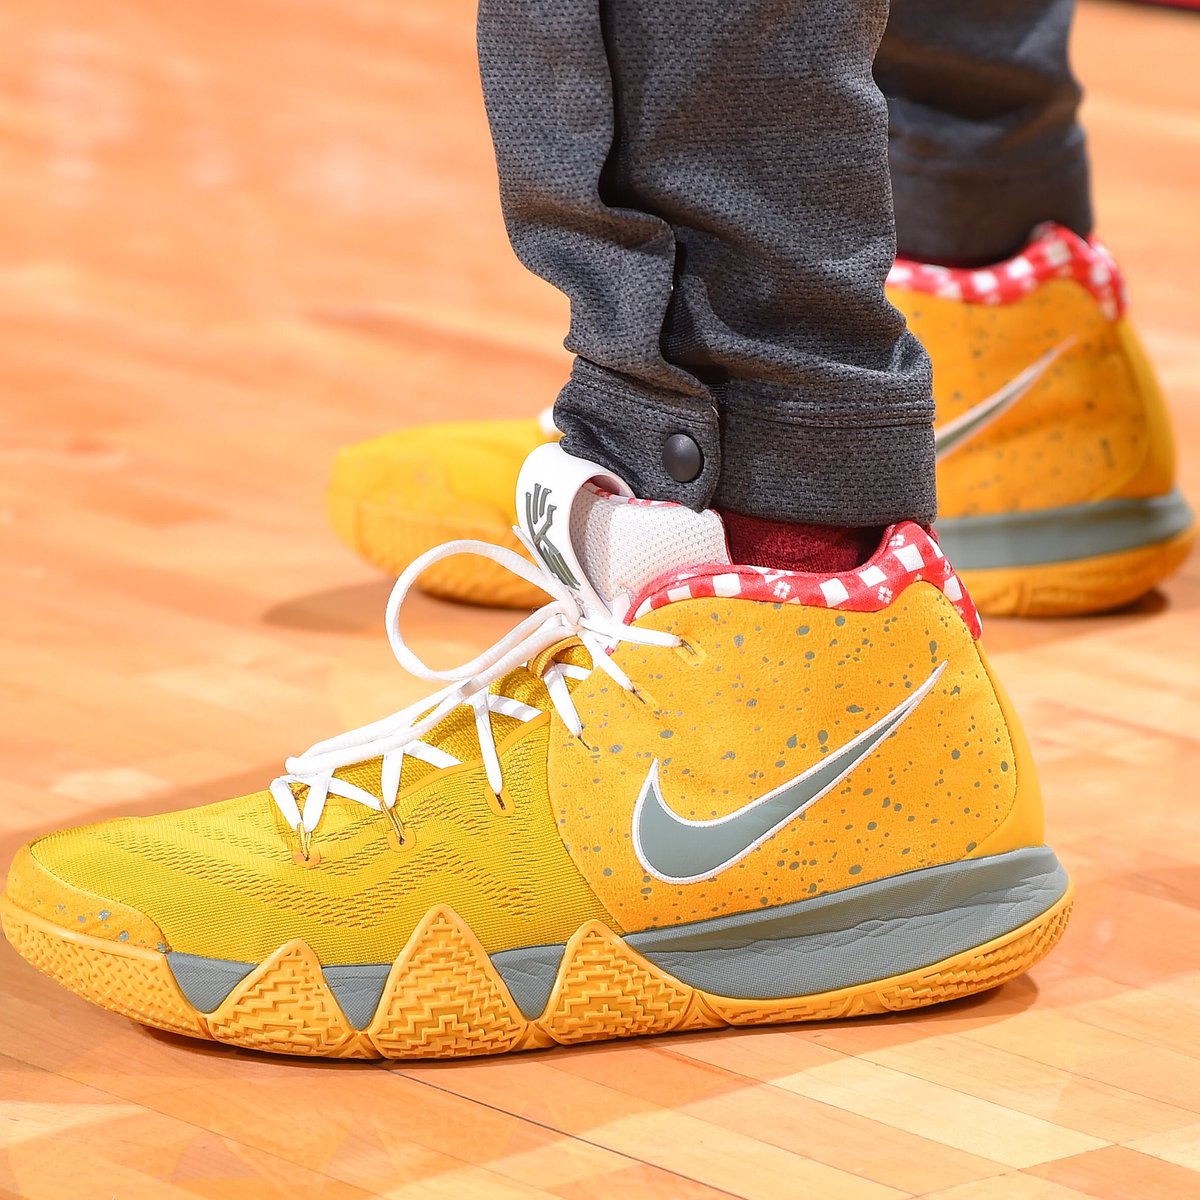 kyrie 4 yellow lobster